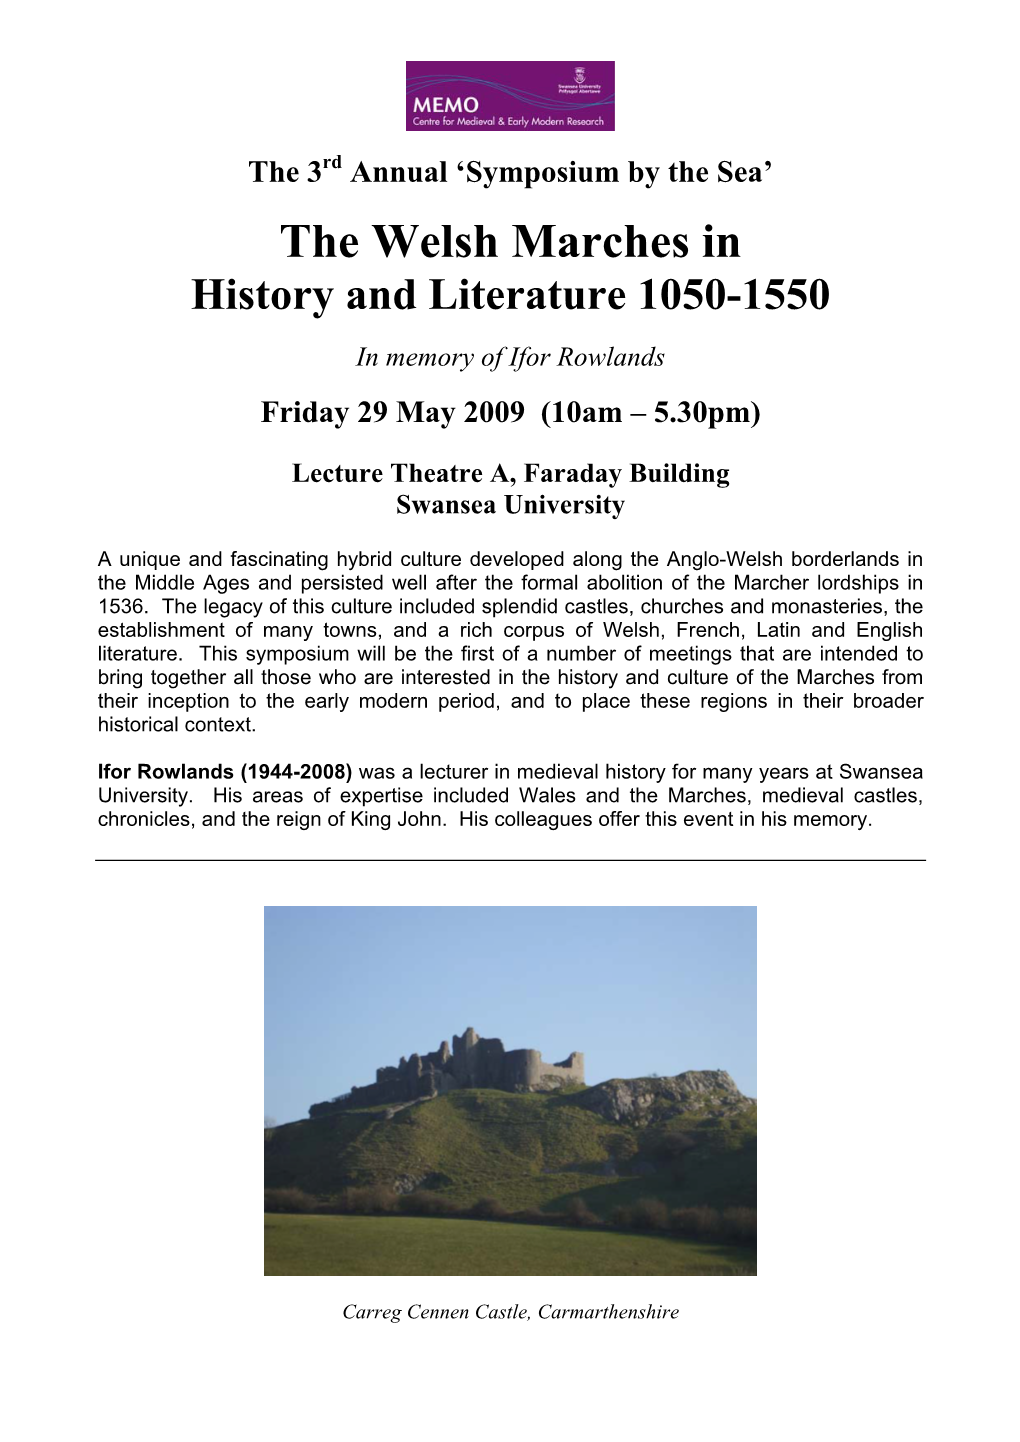 The Welsh Marches in History and Literature 1050-1550